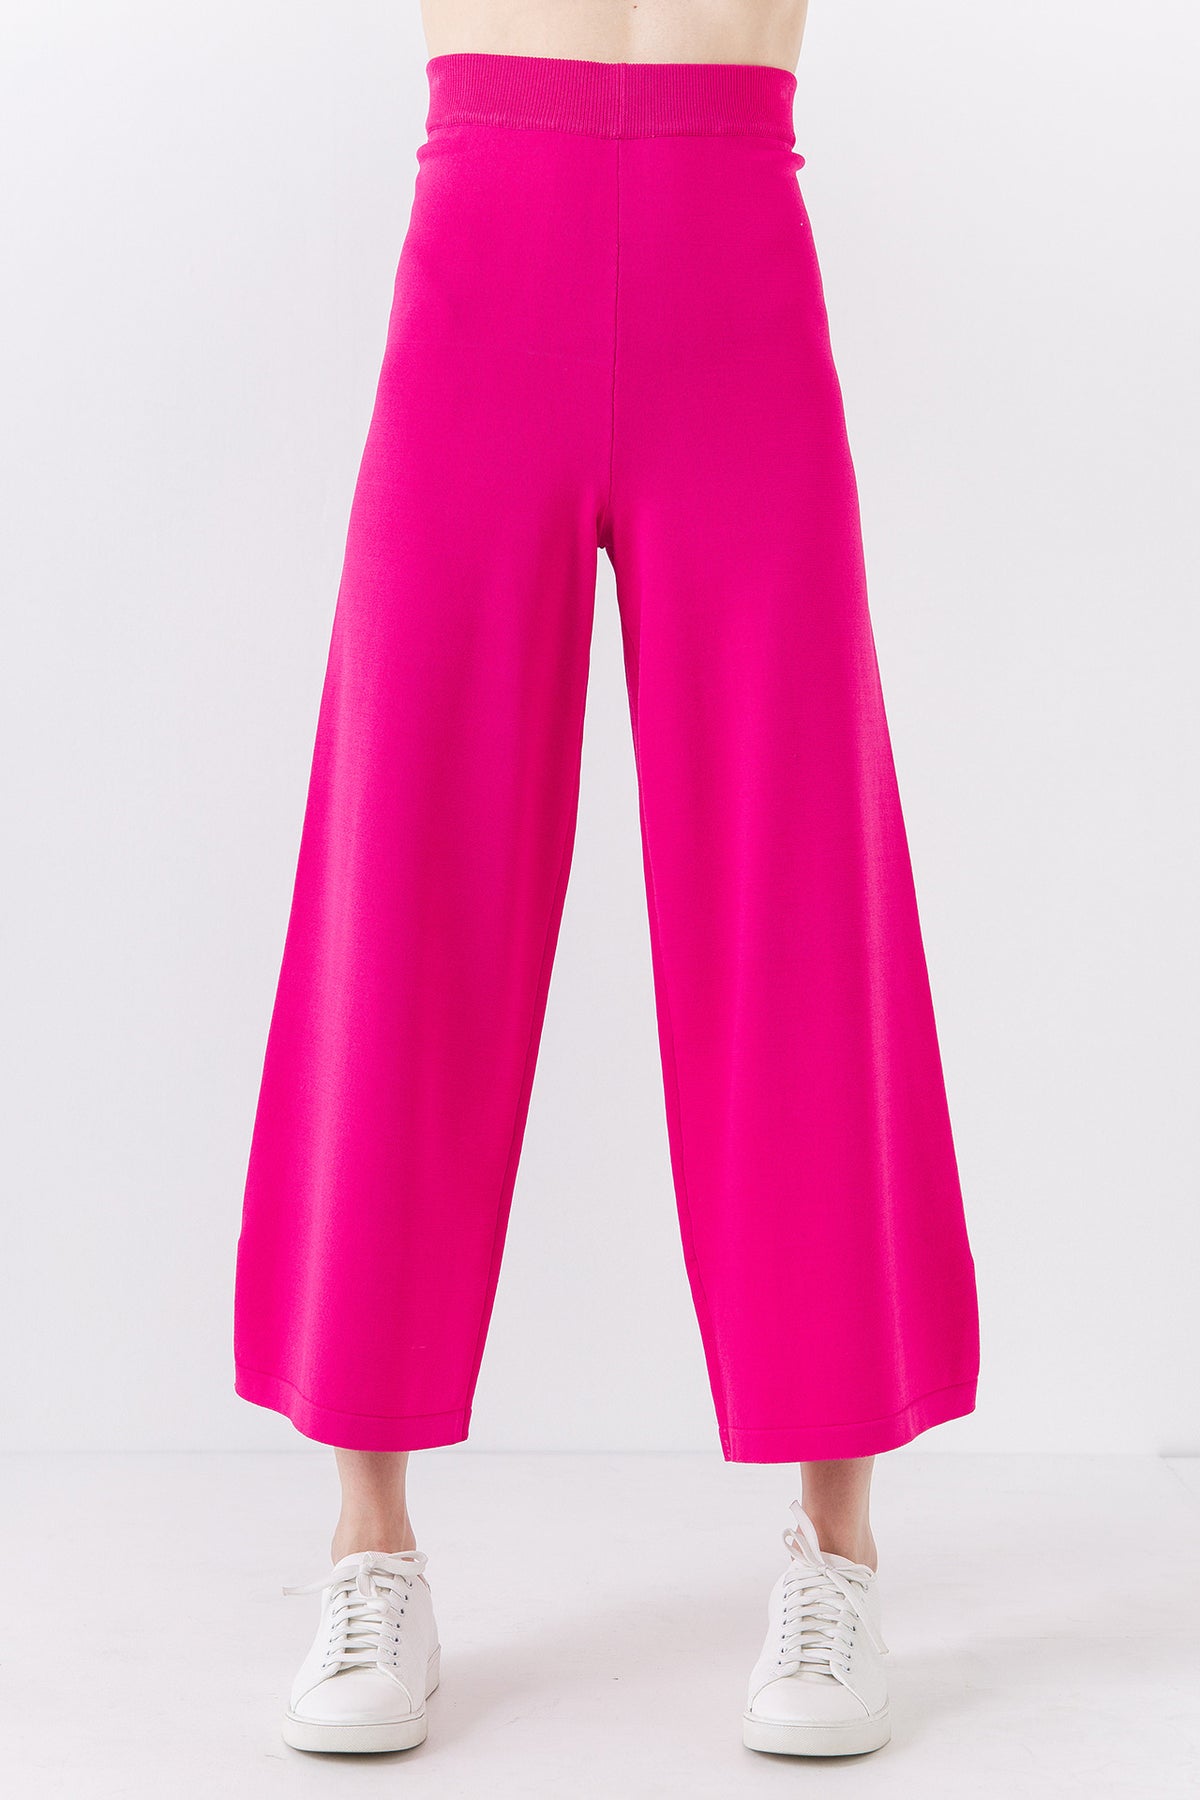 ENDLESS ROSE - Lounge Wear Knit Pants - PANTS available at Objectrare